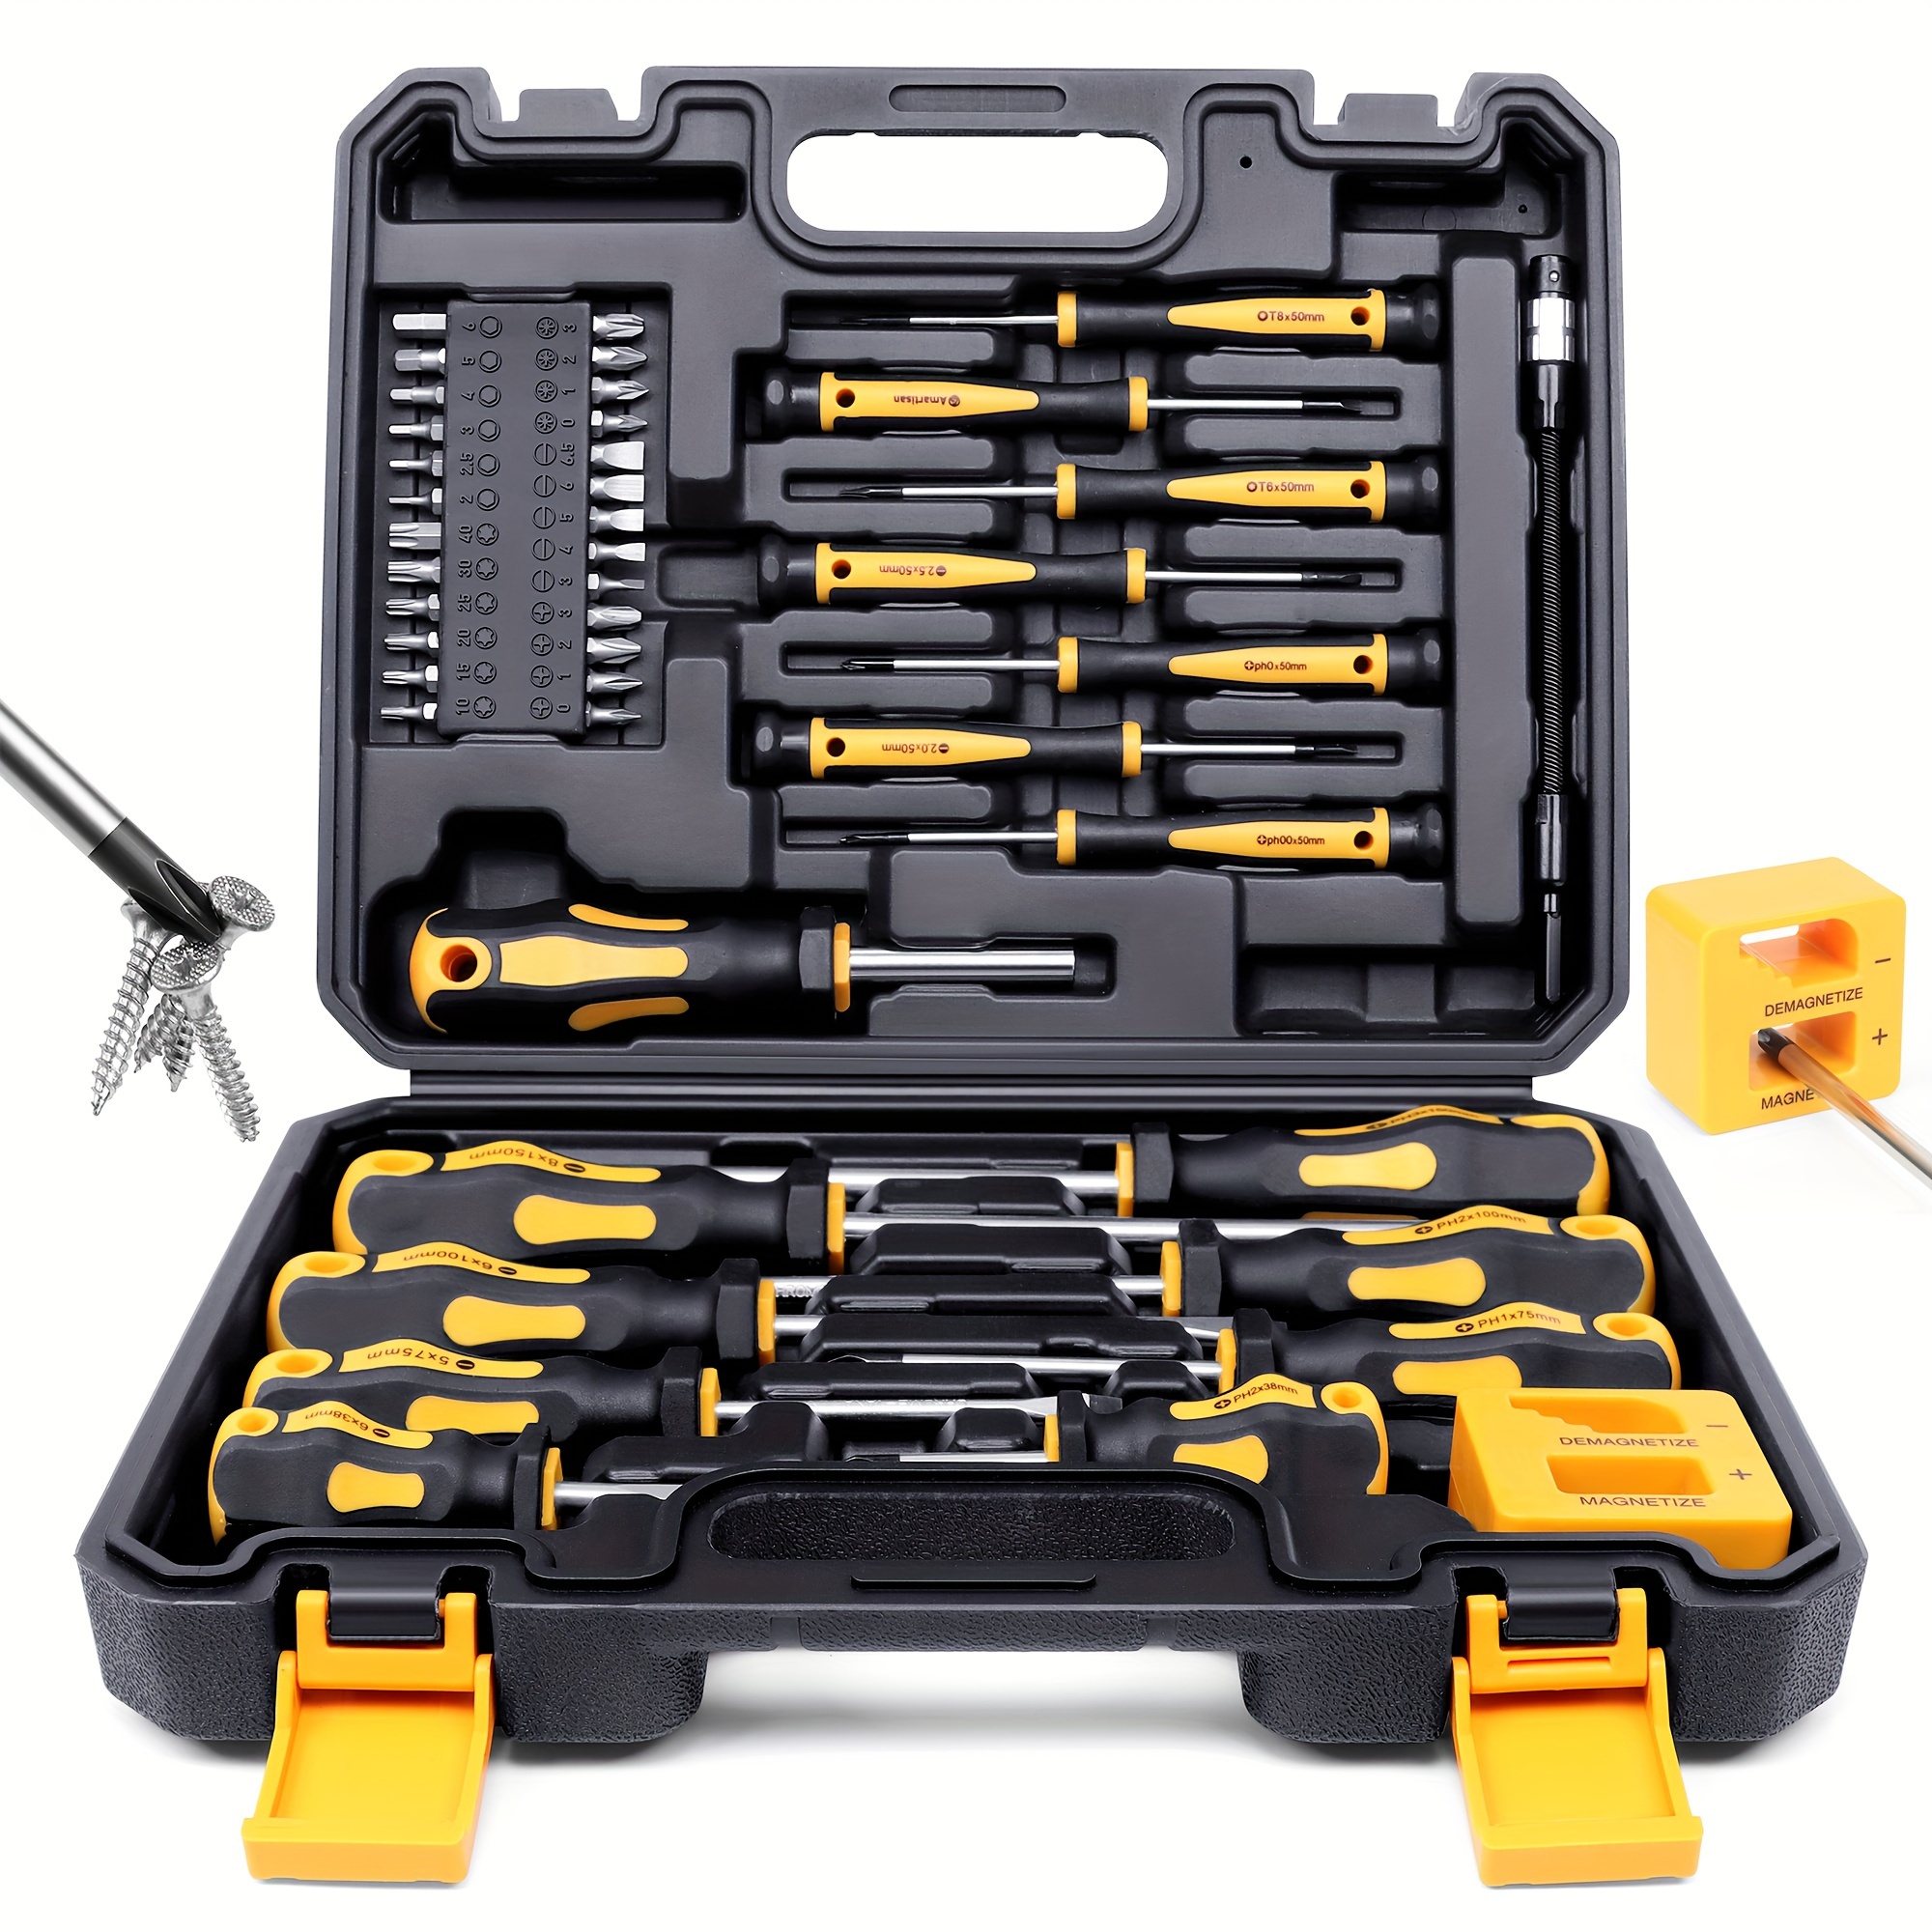 

43pcs Magnetic Screwdriver Set With Slotted, Phillips, Hex, Torx, And Precision Bits, Chrome Vanadium Steel, With Demagnetizer Tool, Non-slip Rubber Handle, Durable Storage Case